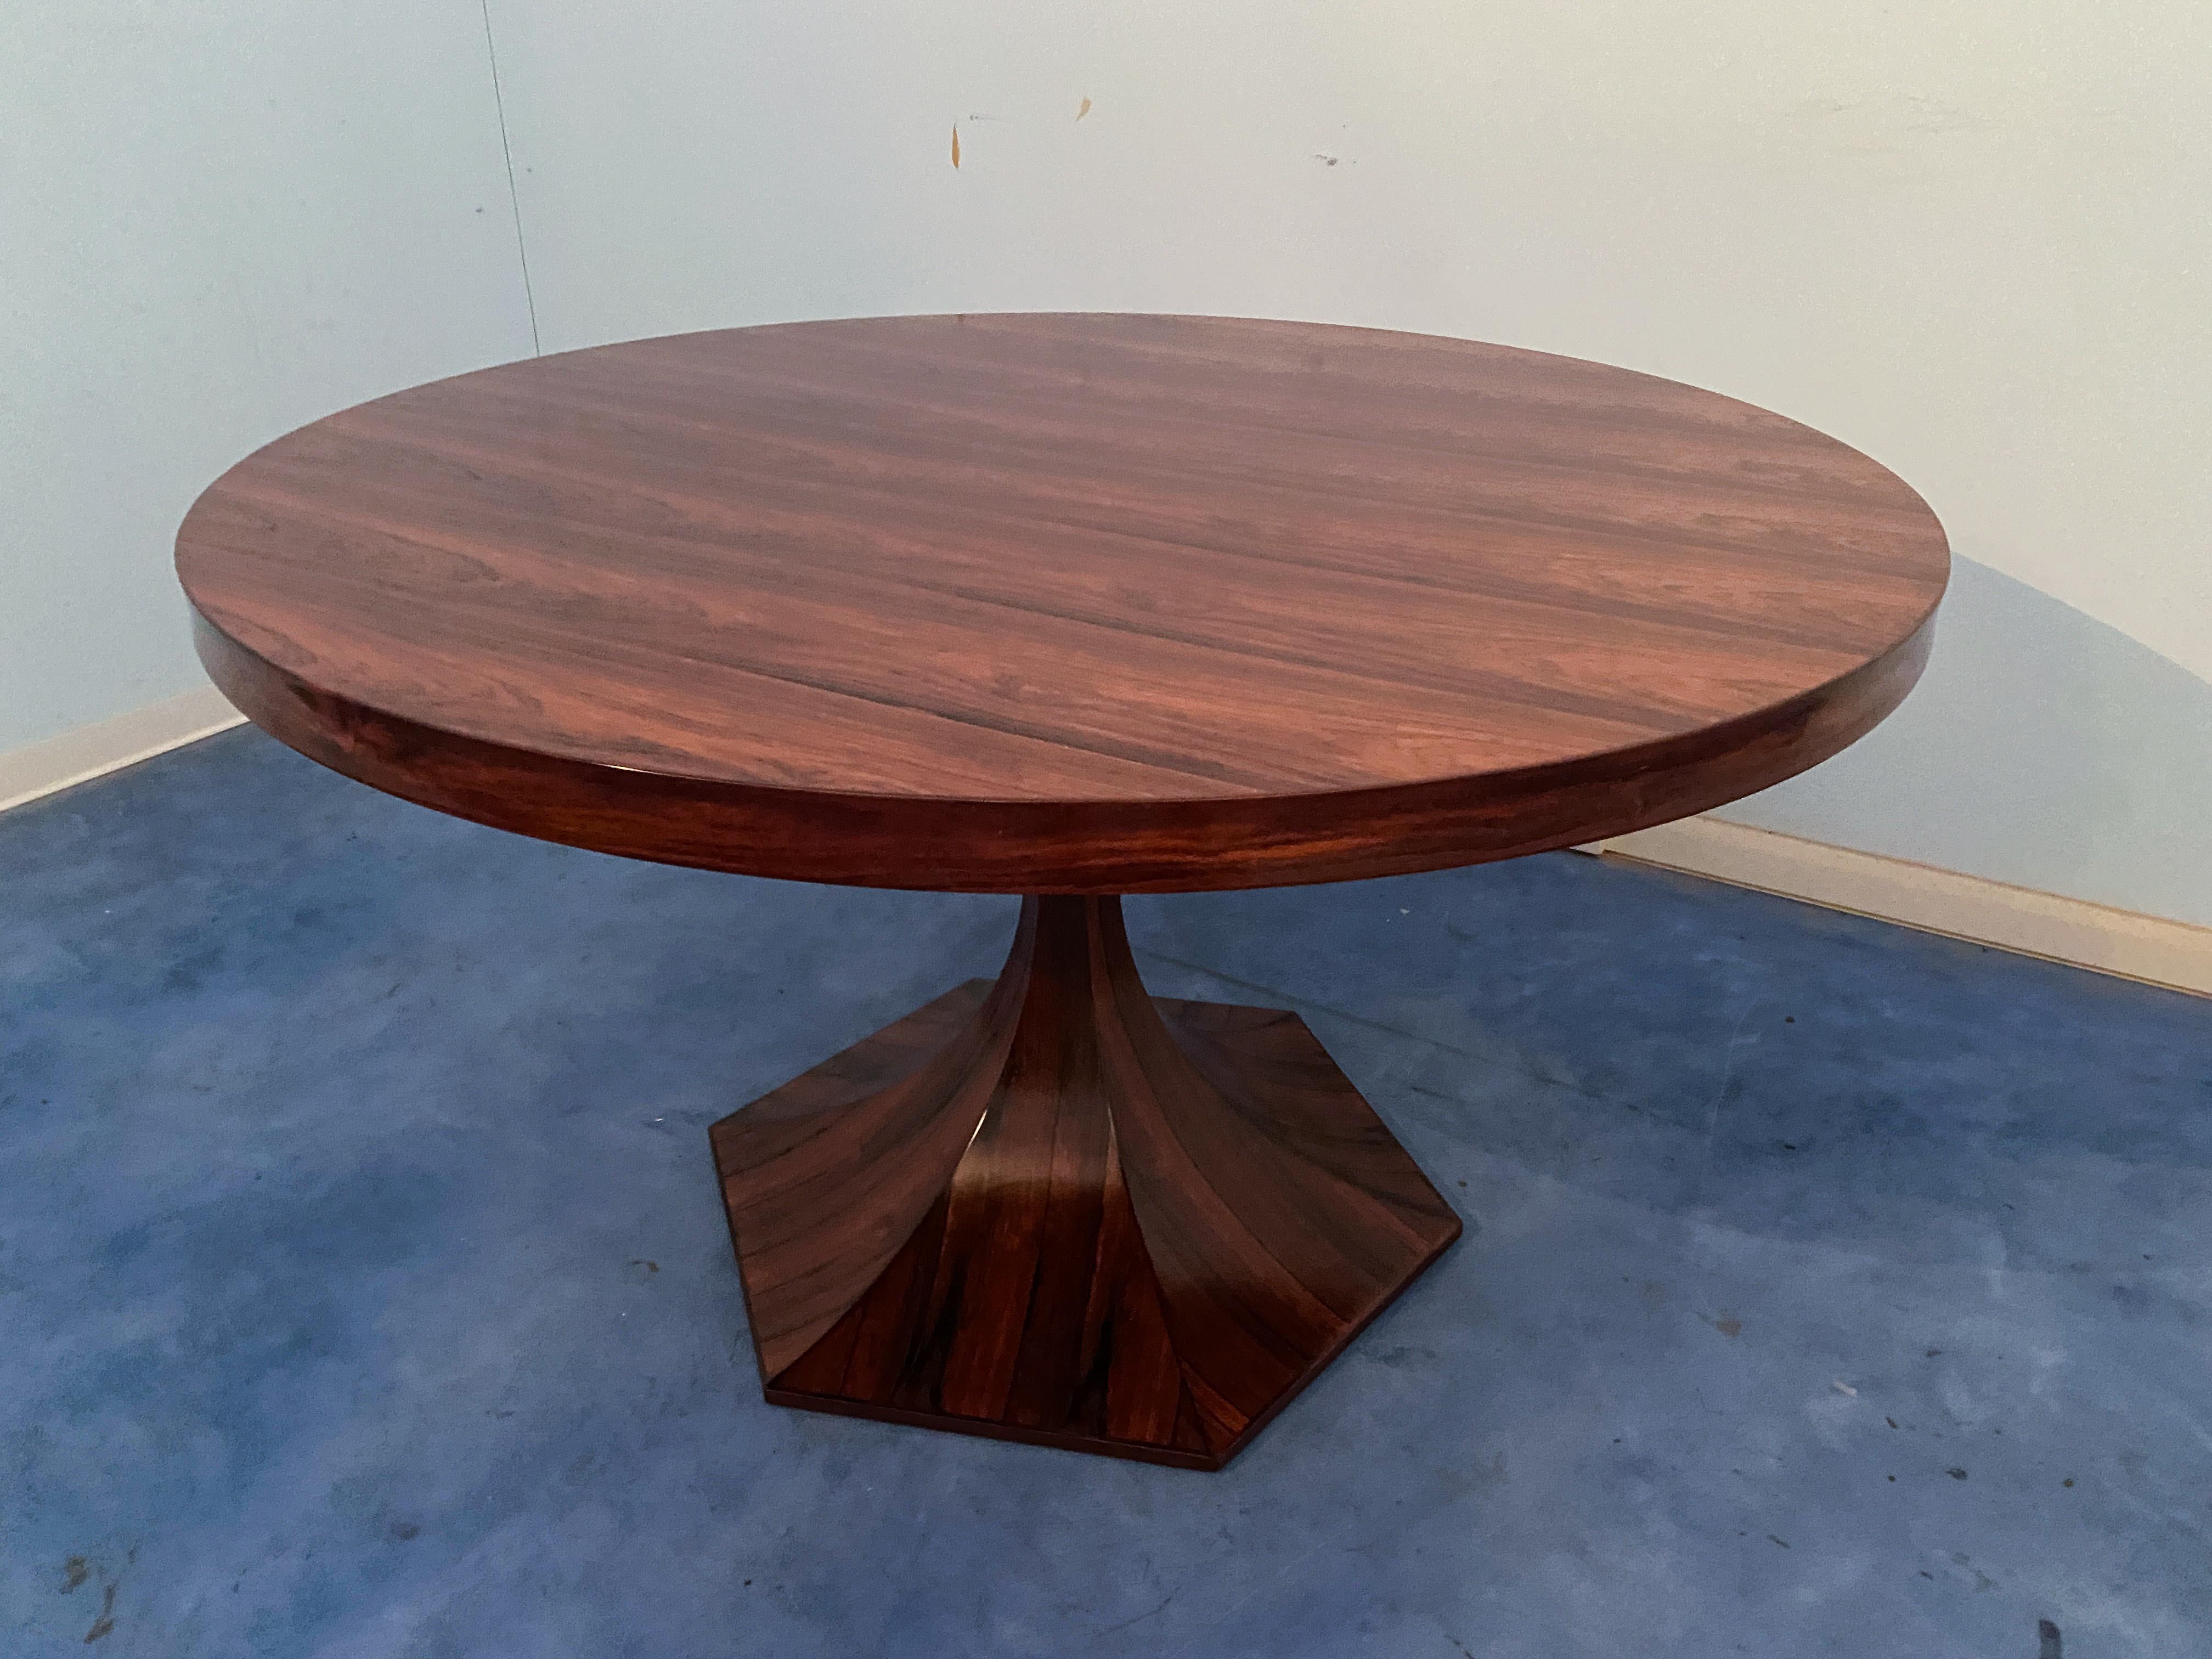 Italian Midcentury Circular Dining Table in Mahogany by Giulio Moscatelli, 1964 For Sale 3